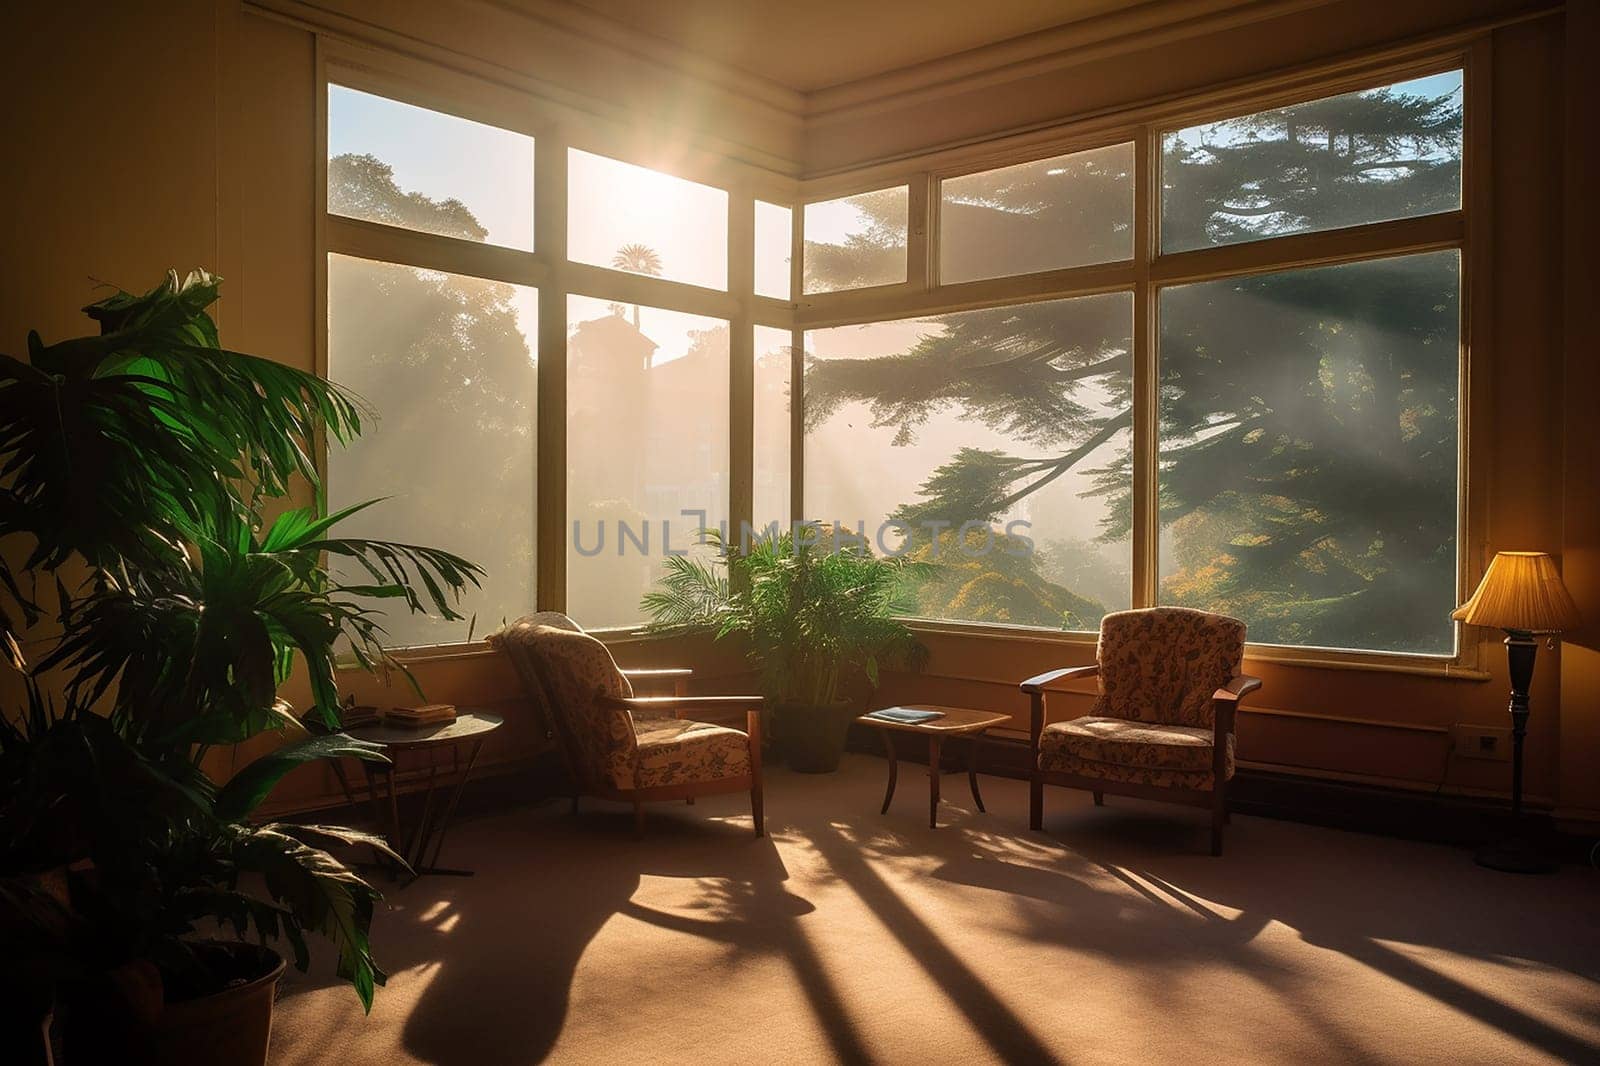 Cozy living room bathed in warm sunlight with comfortable furniture and large windows overlooking a serene natural landscape.